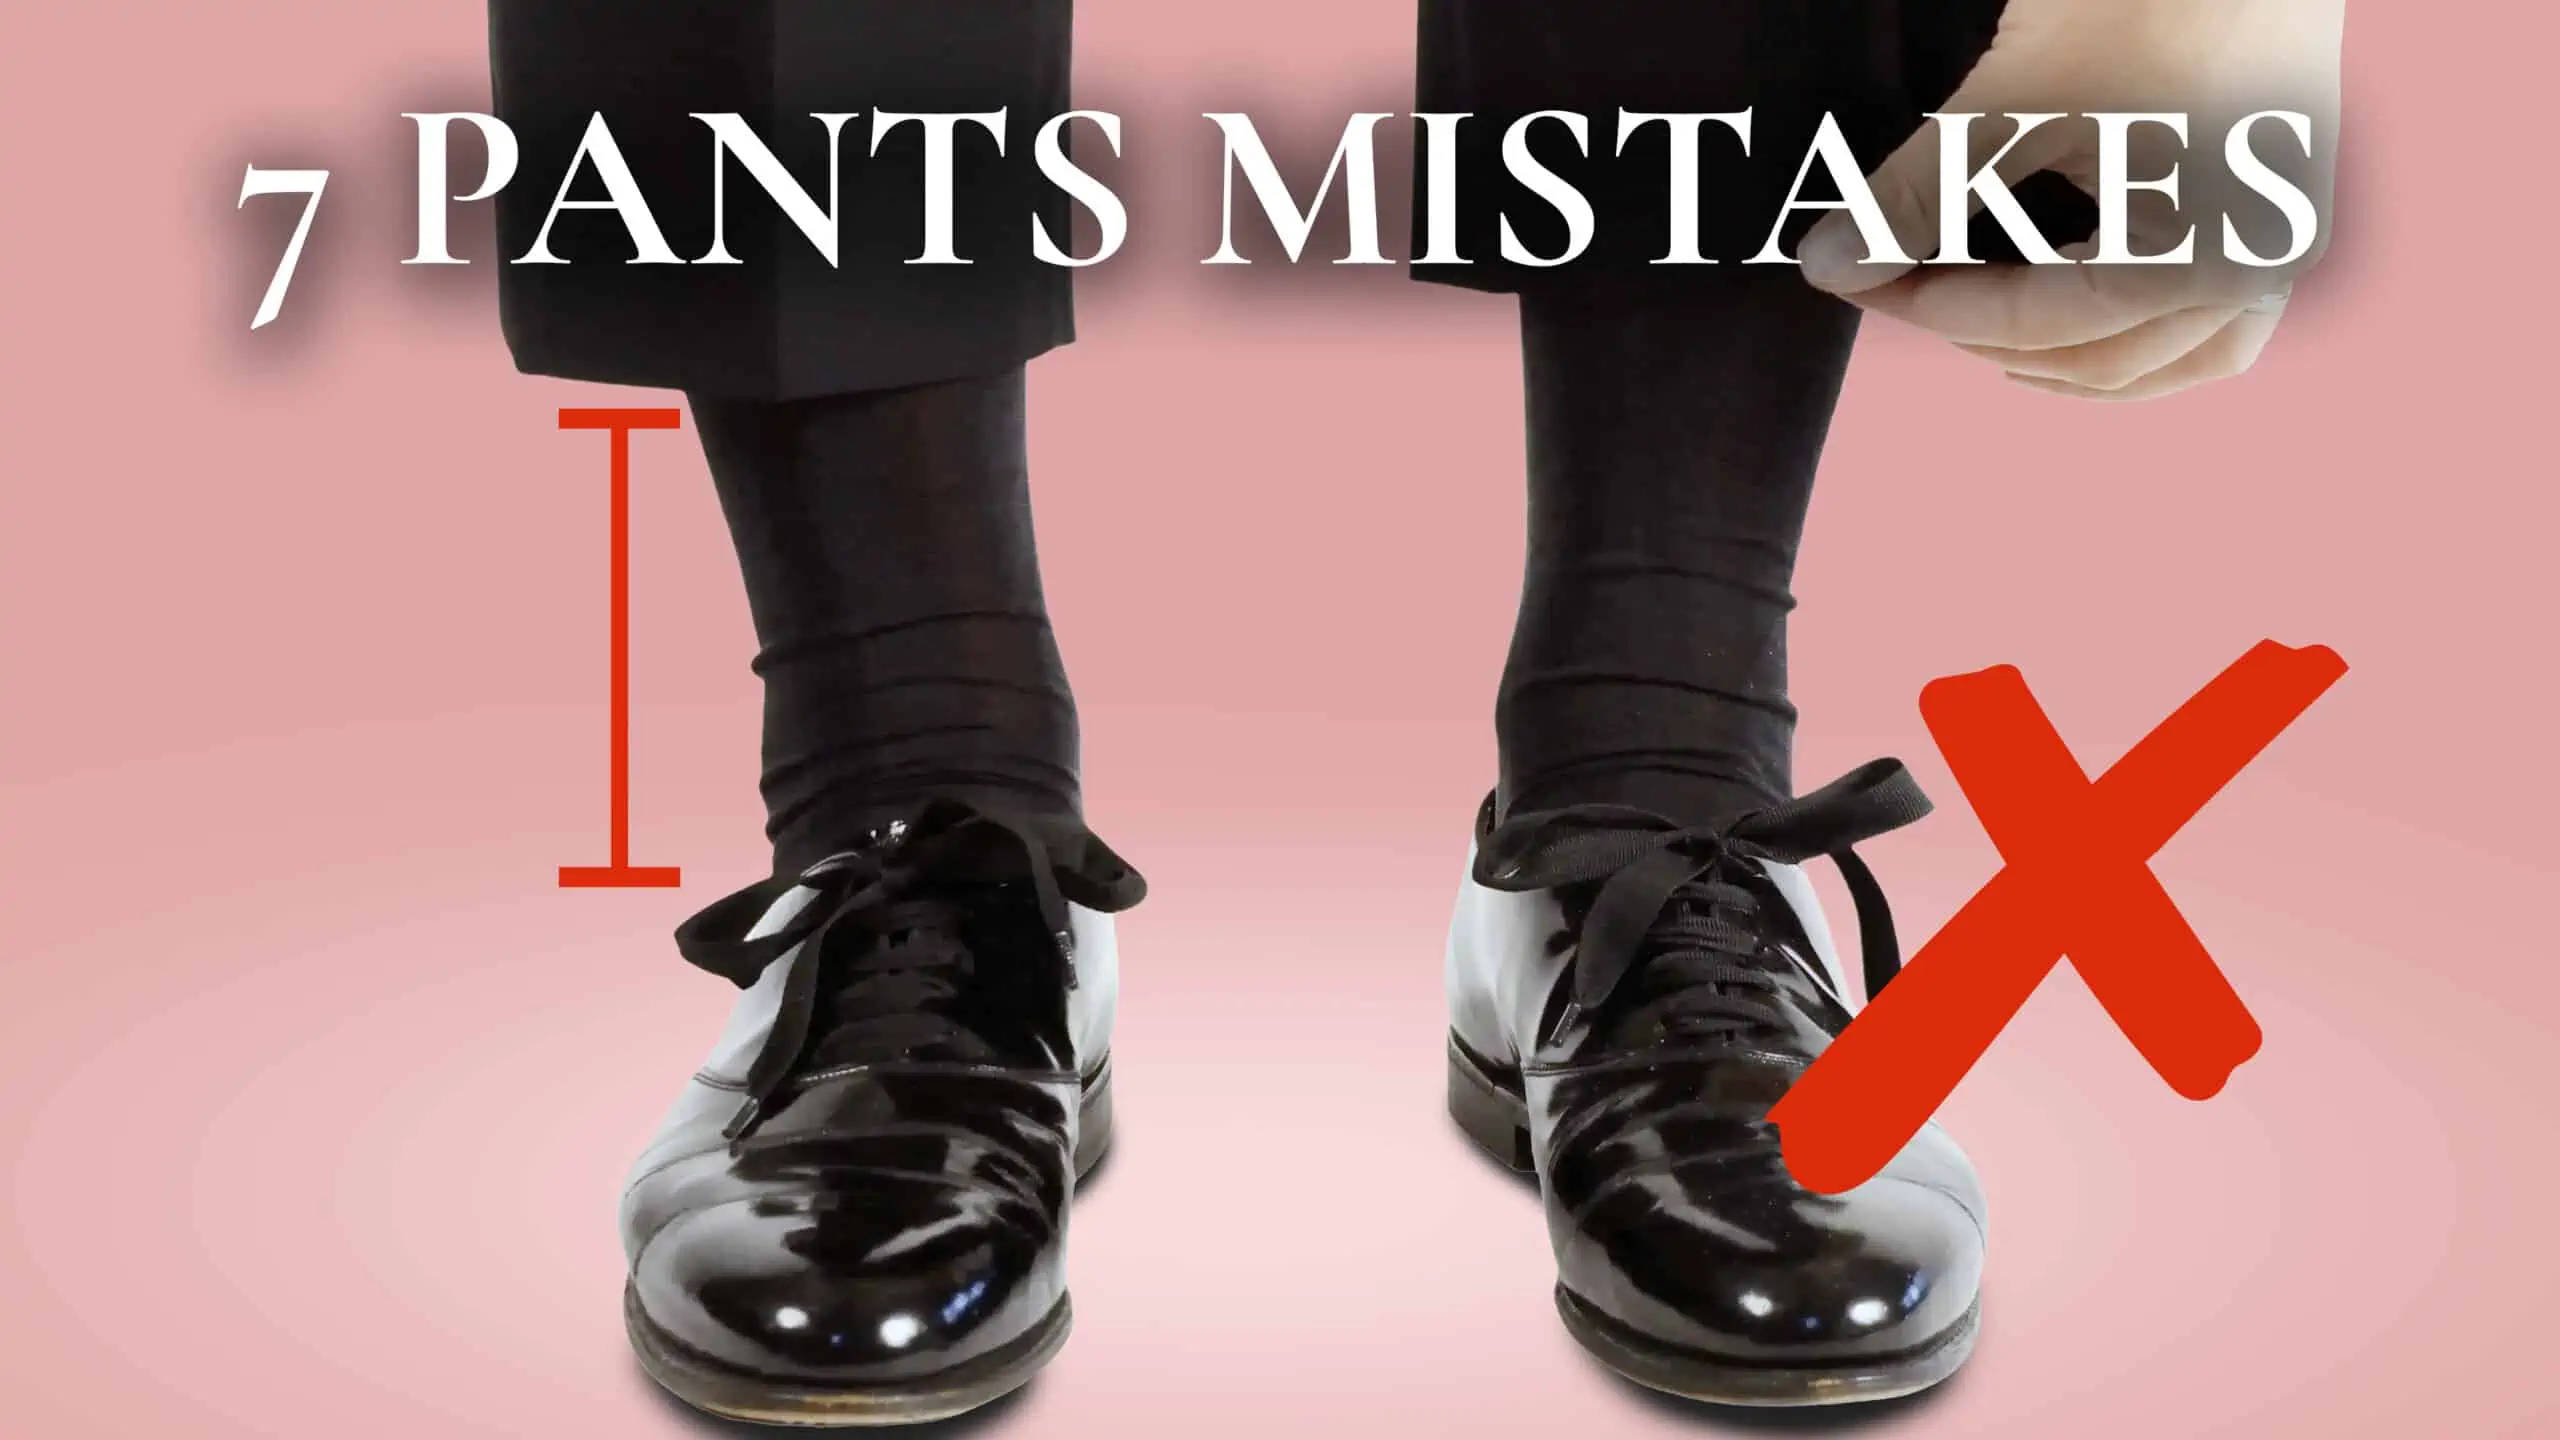 7 pants mistakes 3840x2160 scaled